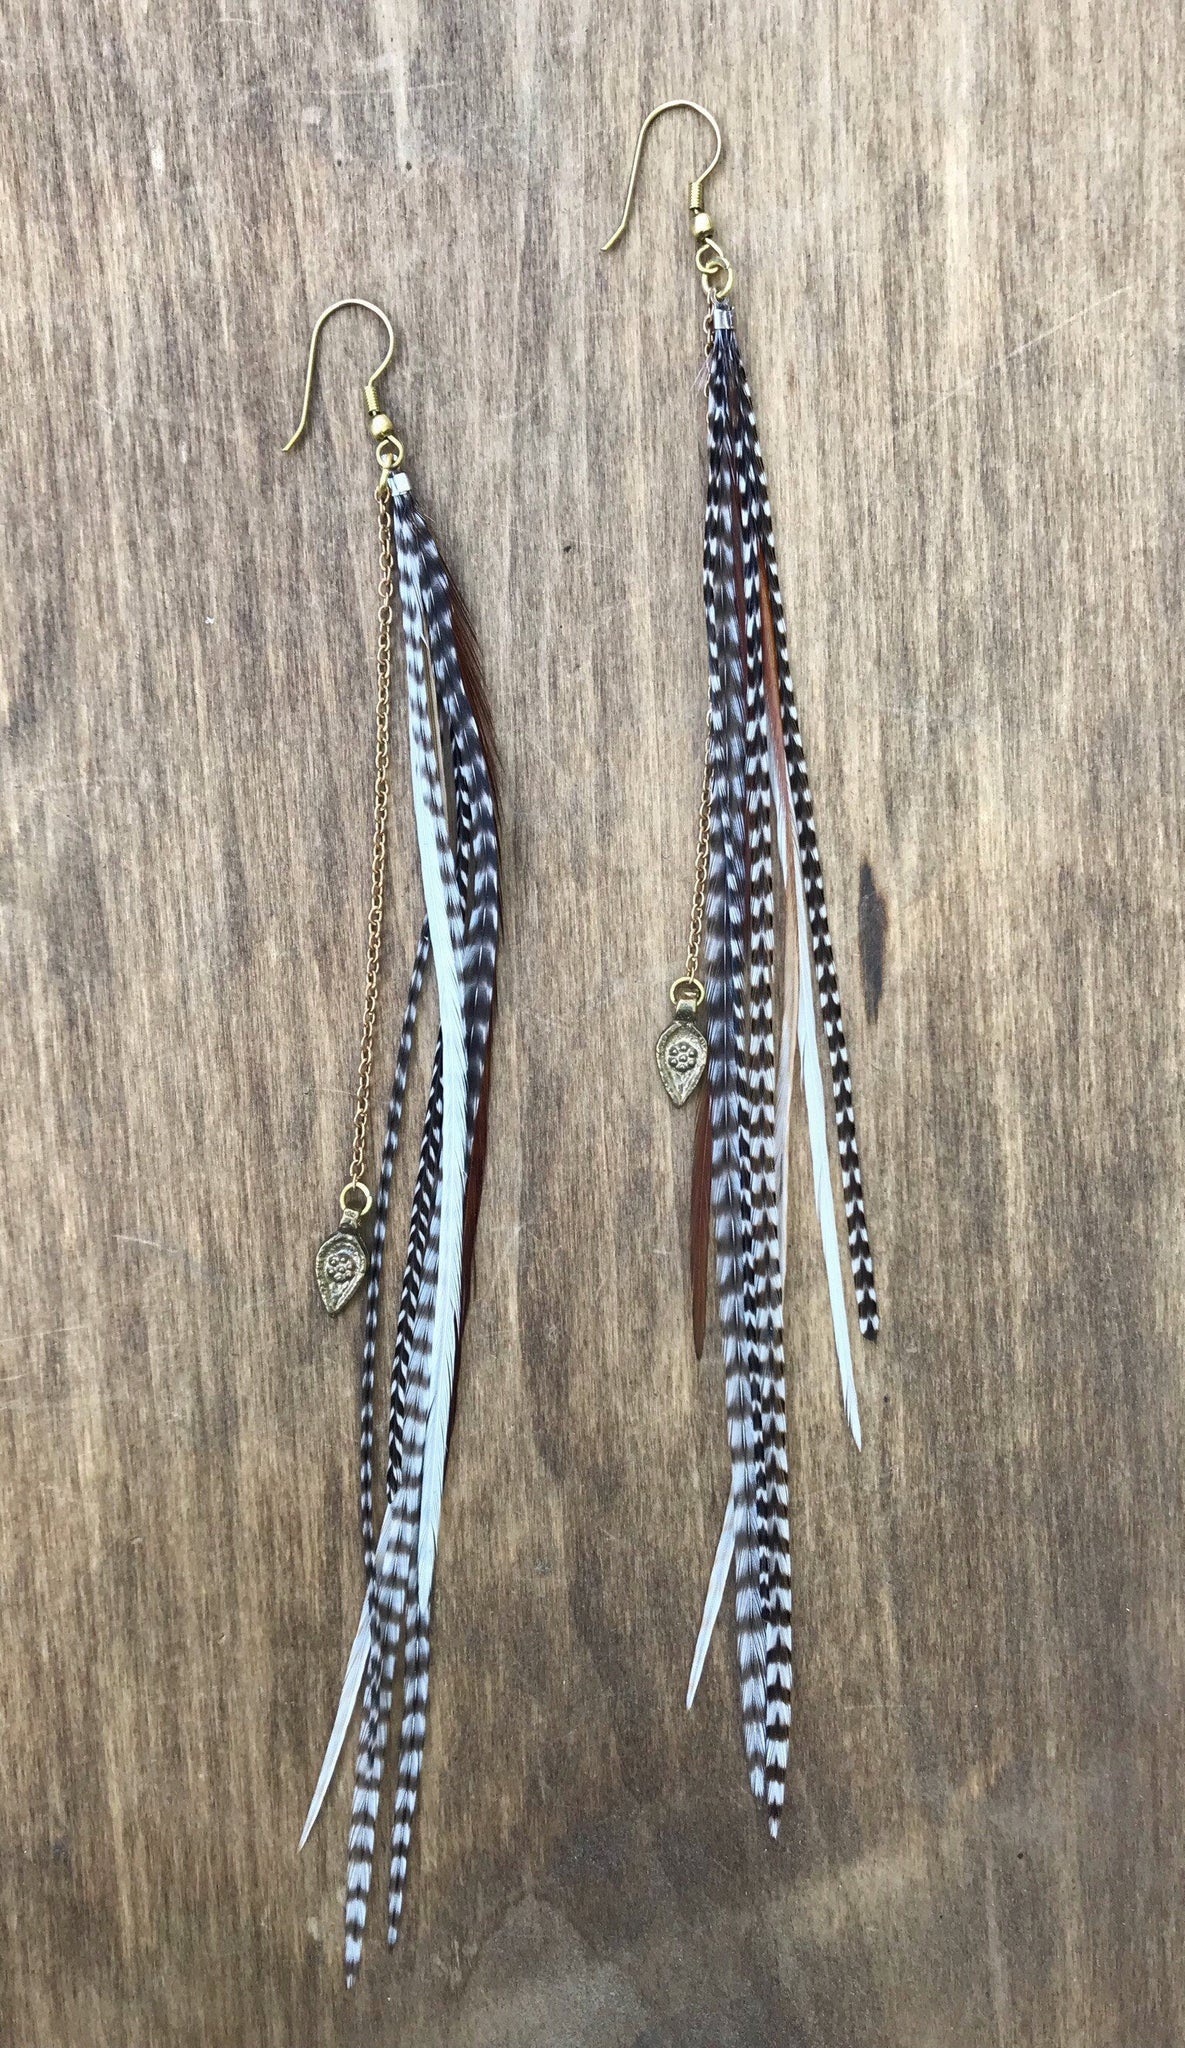 Natural Craft Feathers Bulk Earring Feathers for Earrings Fly Tying  Feathers Patterned Thin Craft Feathers Feather Extensions 25 per Pack 